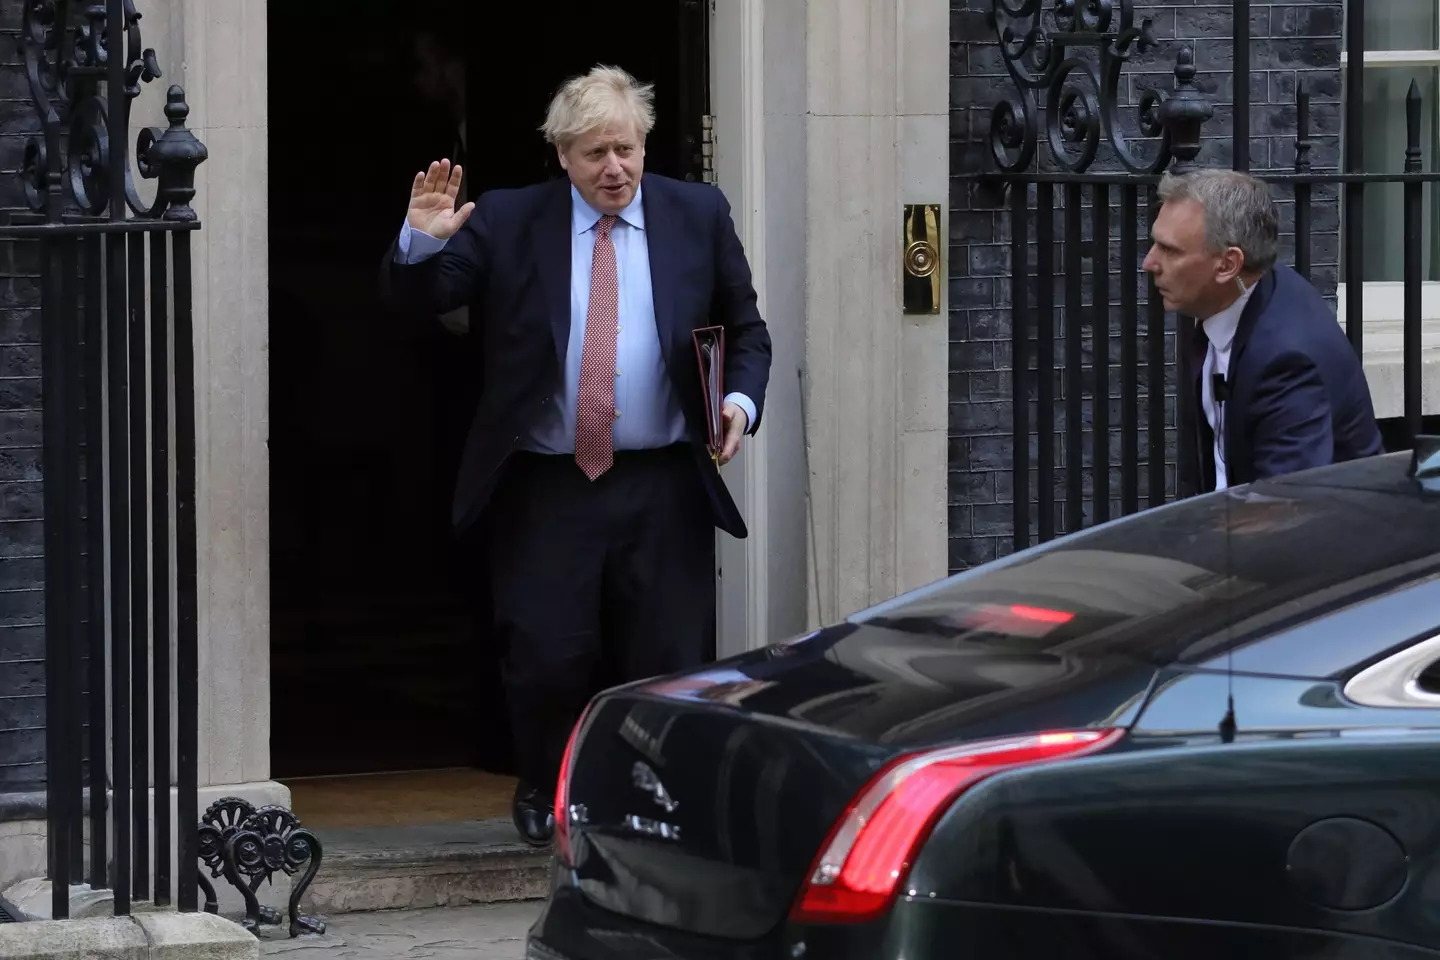 Johnson is resigning as the leader of the country.